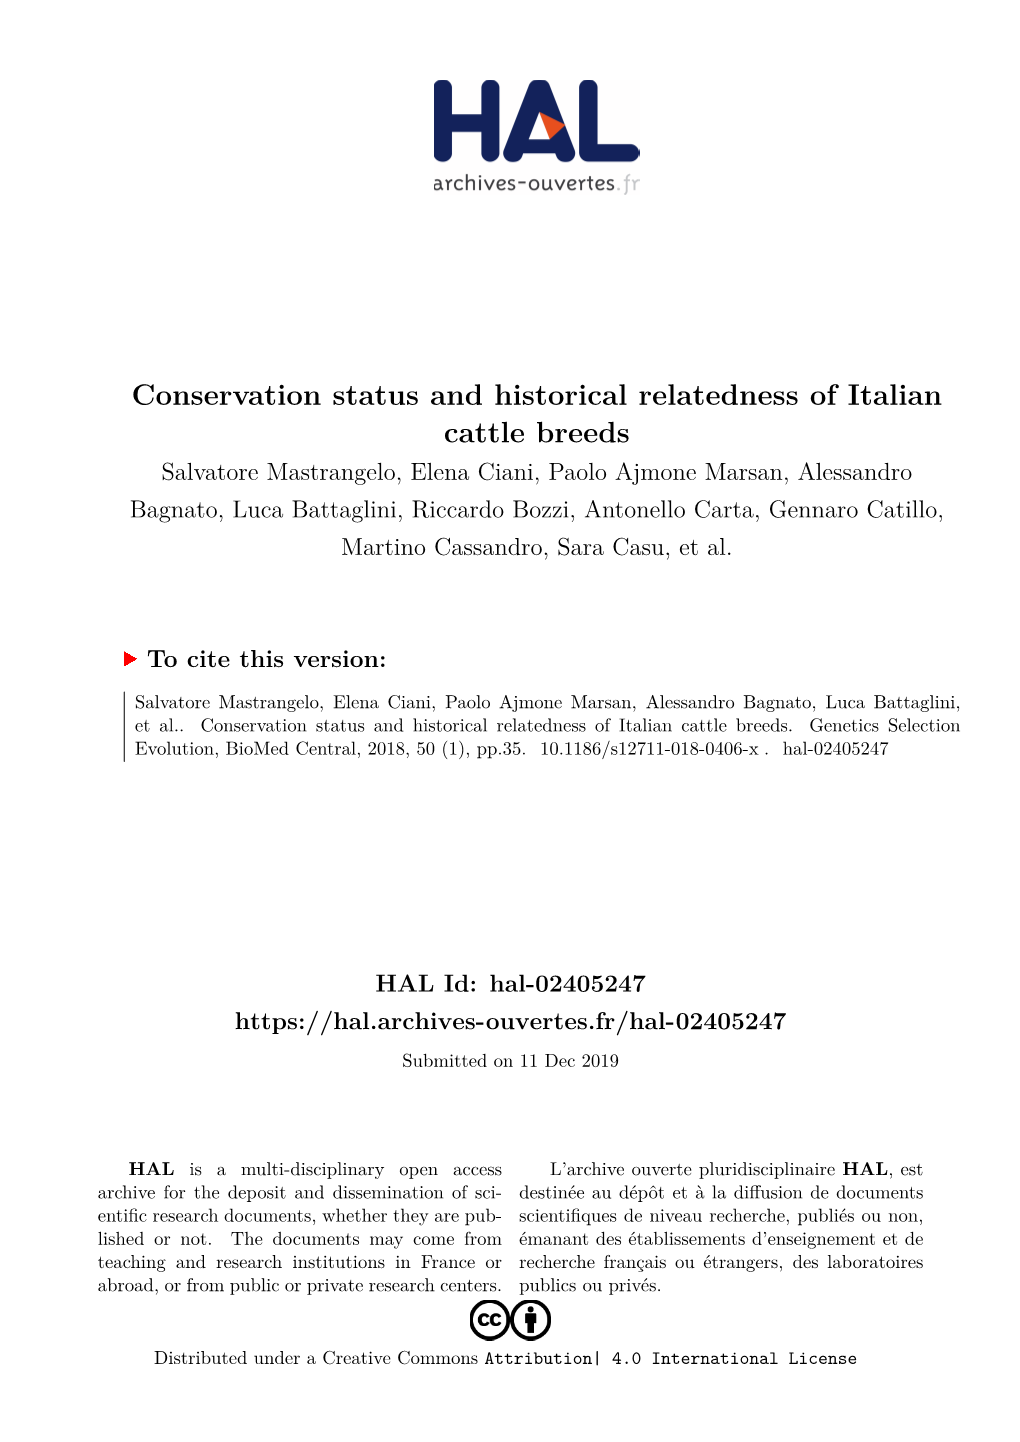 Conservation Status and Historical Relatedness of Italian Cattle Breeds